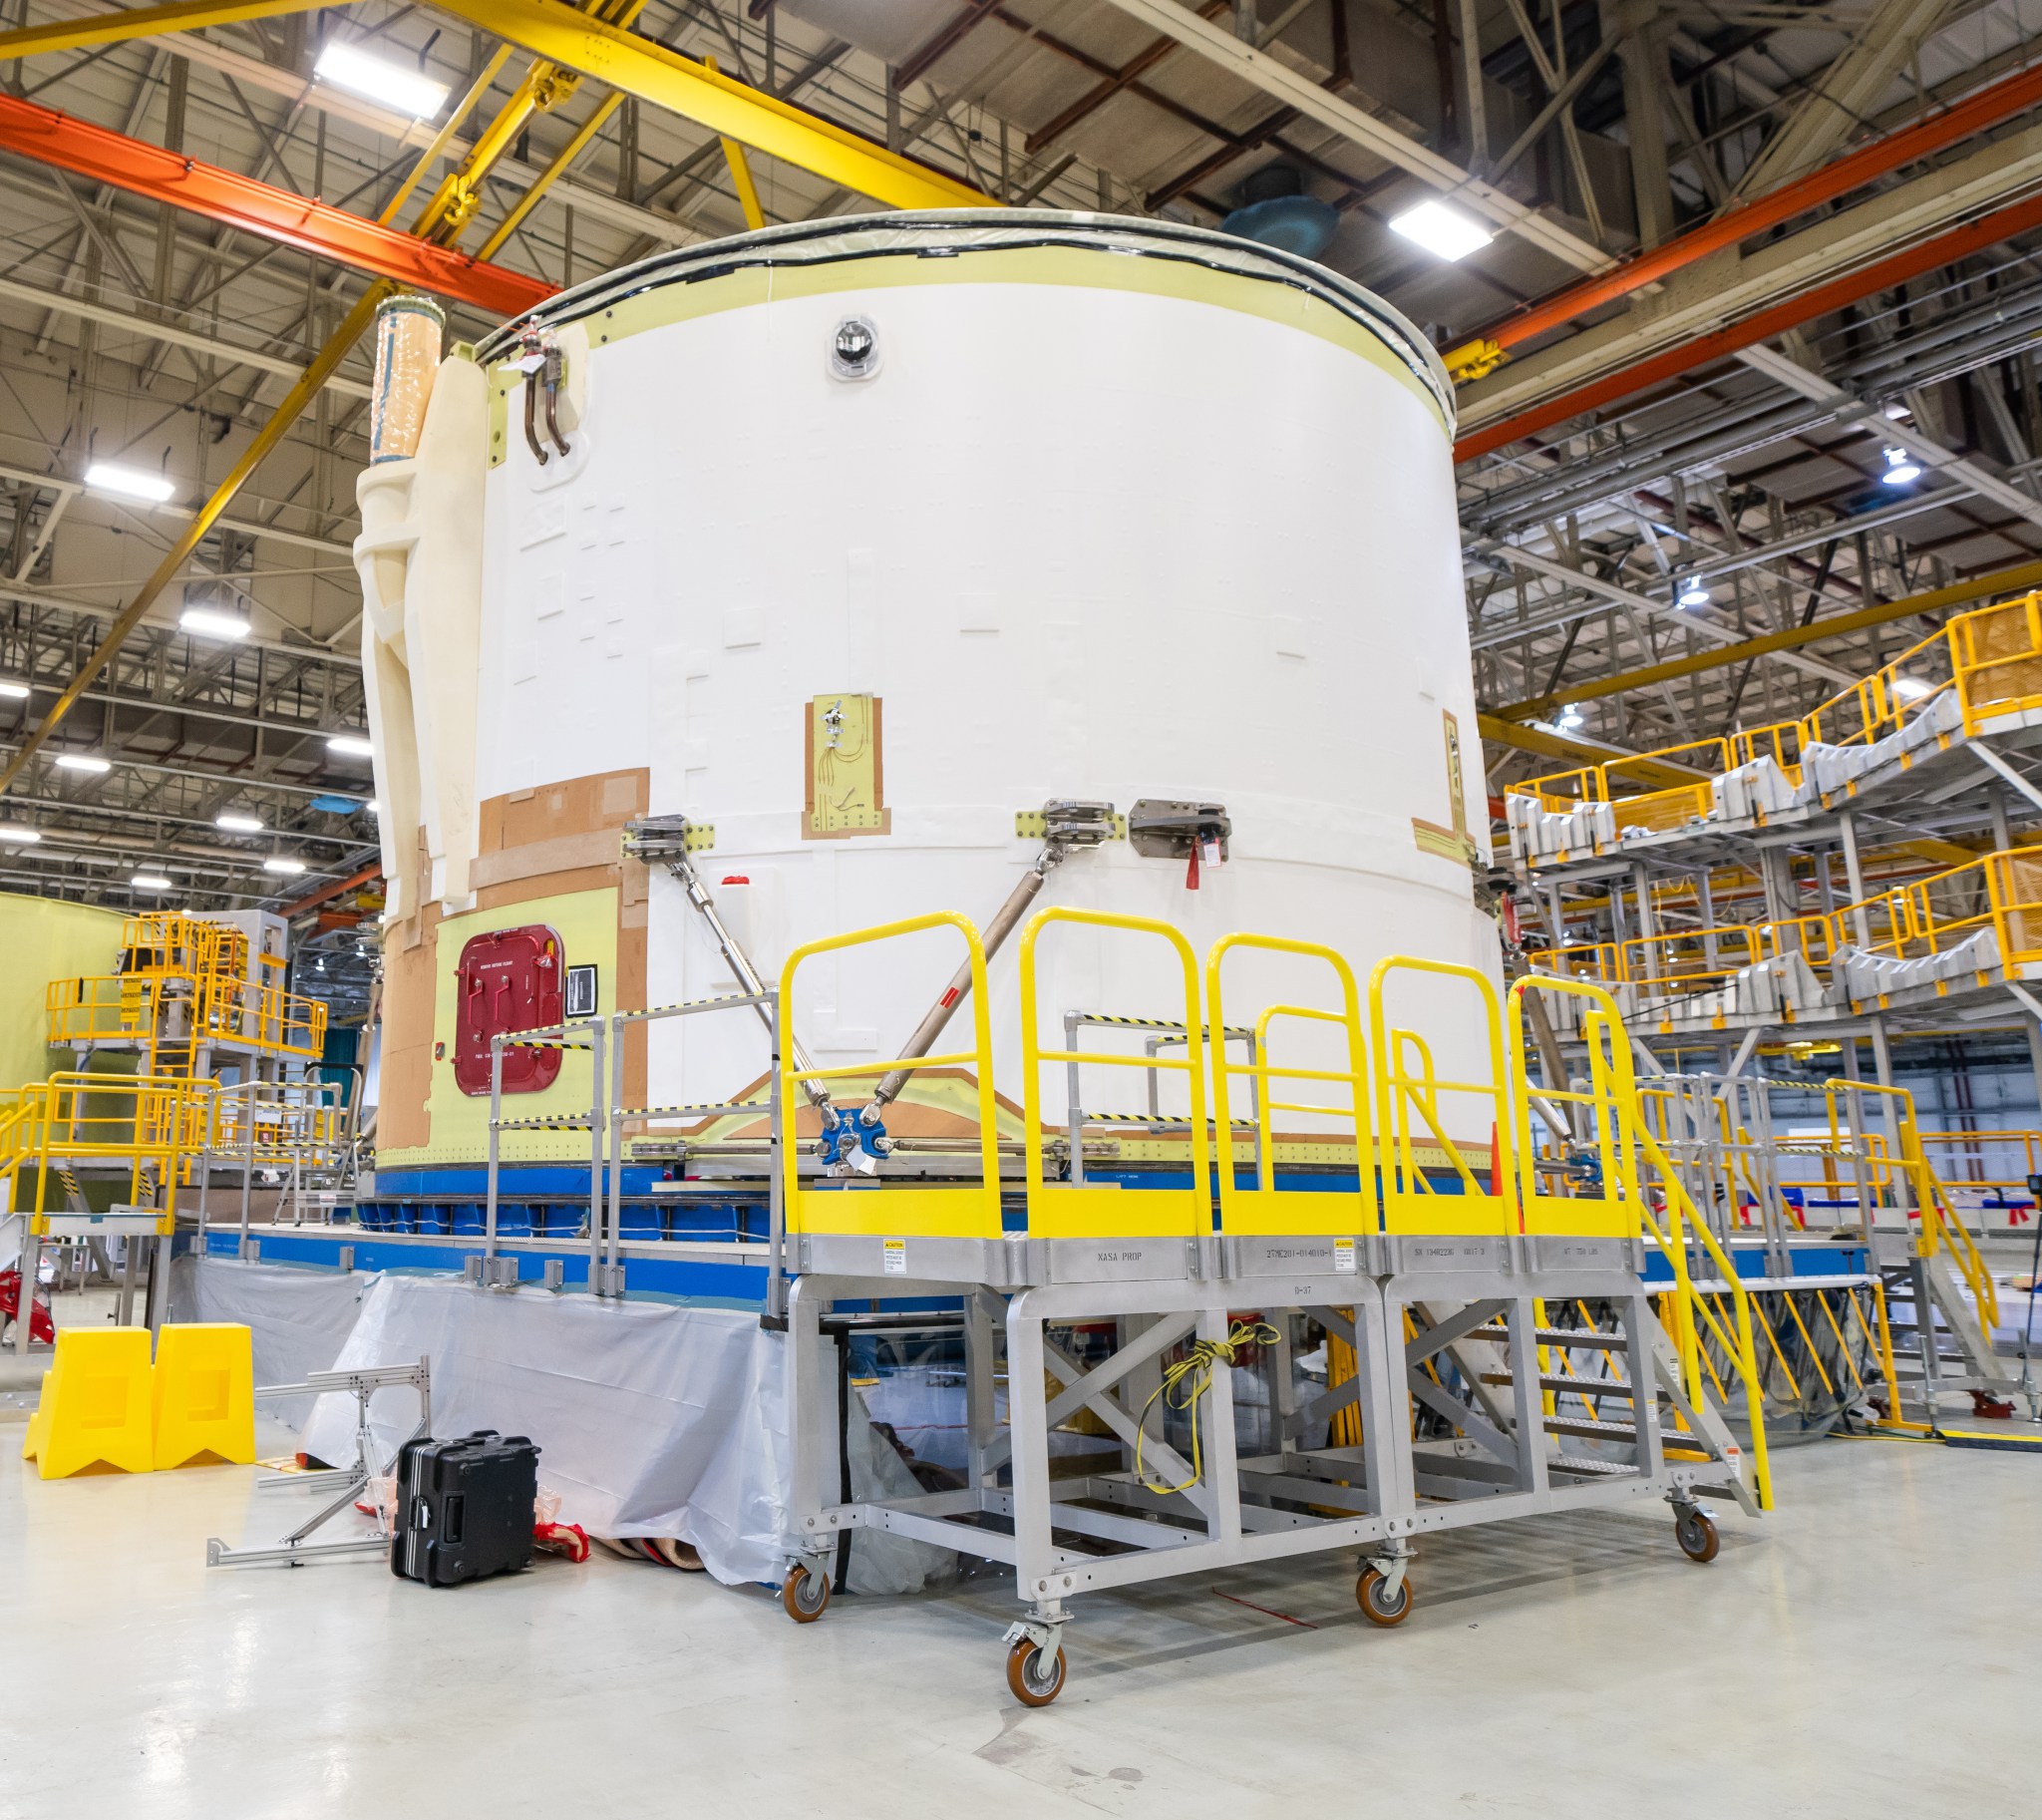 : NASA and Boeing have completed the majority of outfitting for the core stage engine section for the first flight of the SLS.